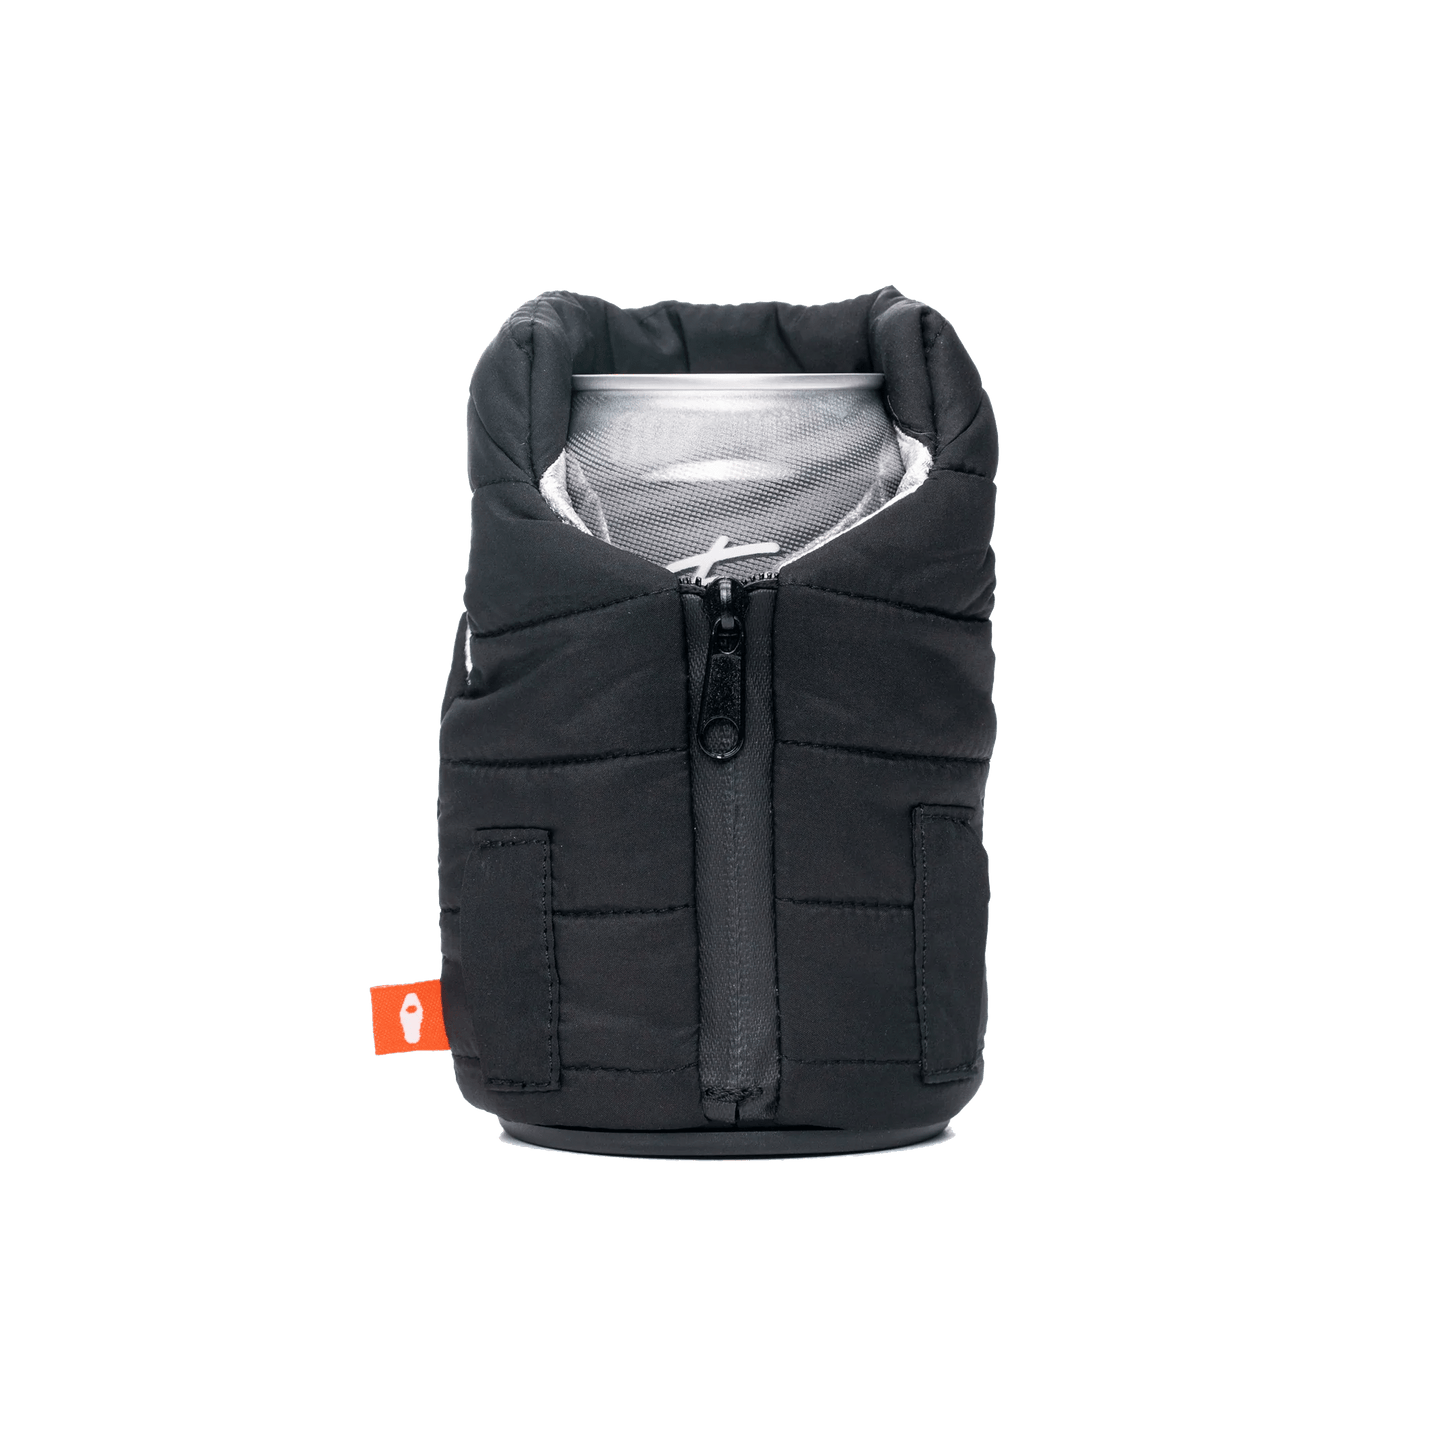 Black Custom The Puffy Vest Coozie